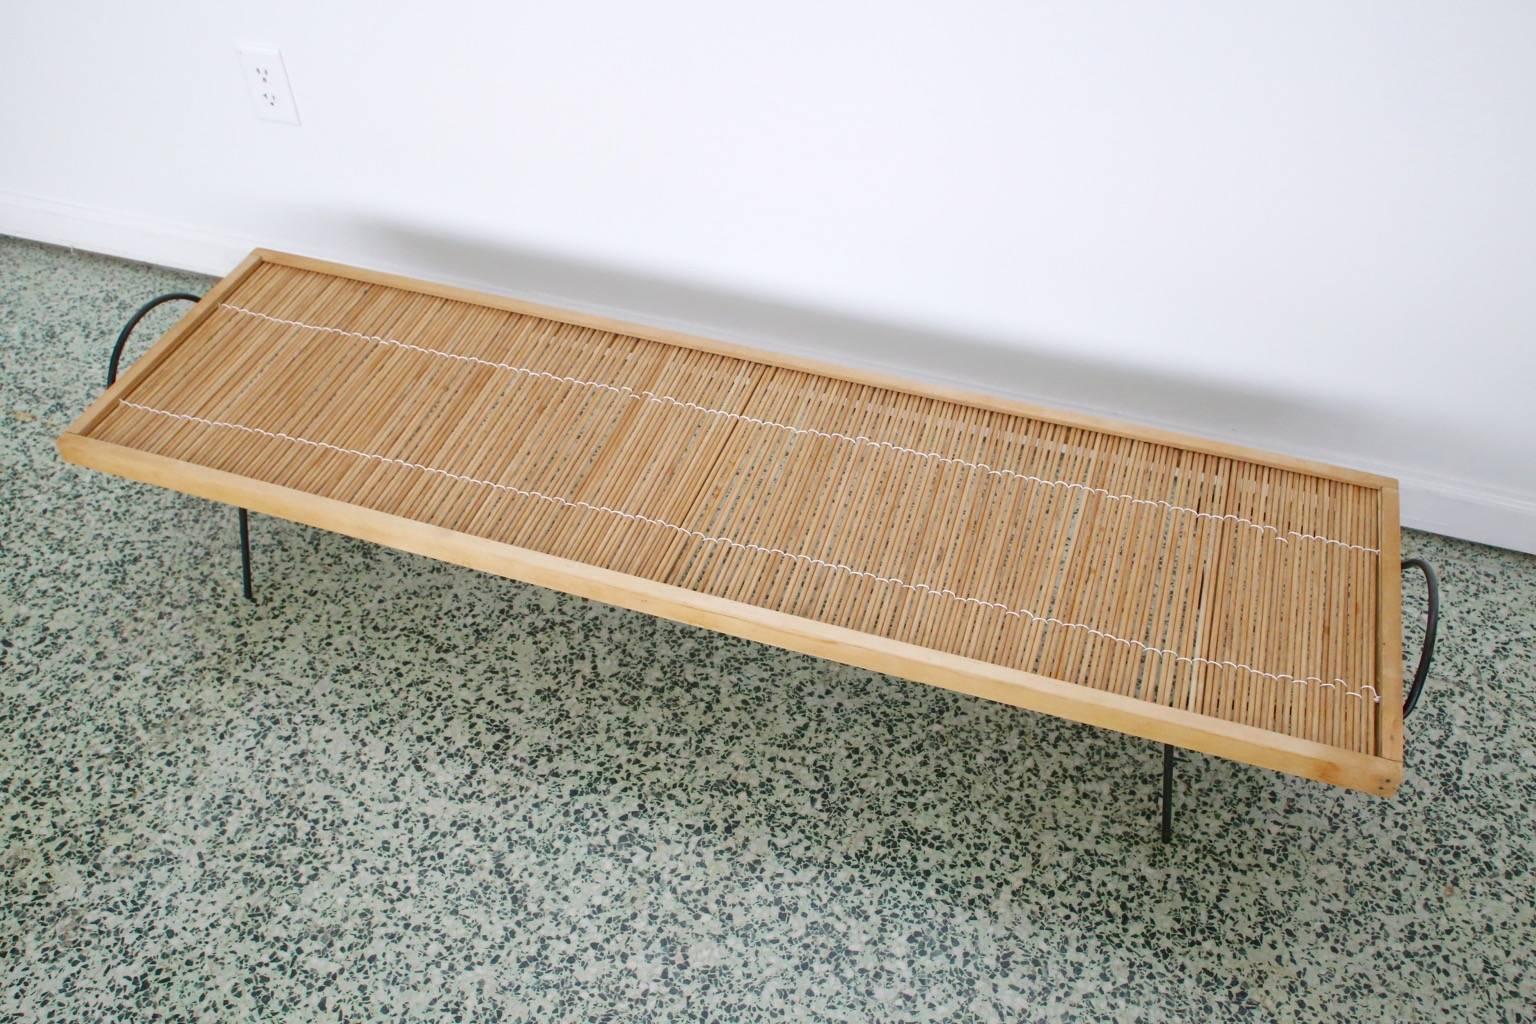 Rare coffee table with inset dowels by William Katavolos, Ross Littell and Douglas Kelley for Laverne Originals, circa 1949. Original dowels. Newly rewoven.